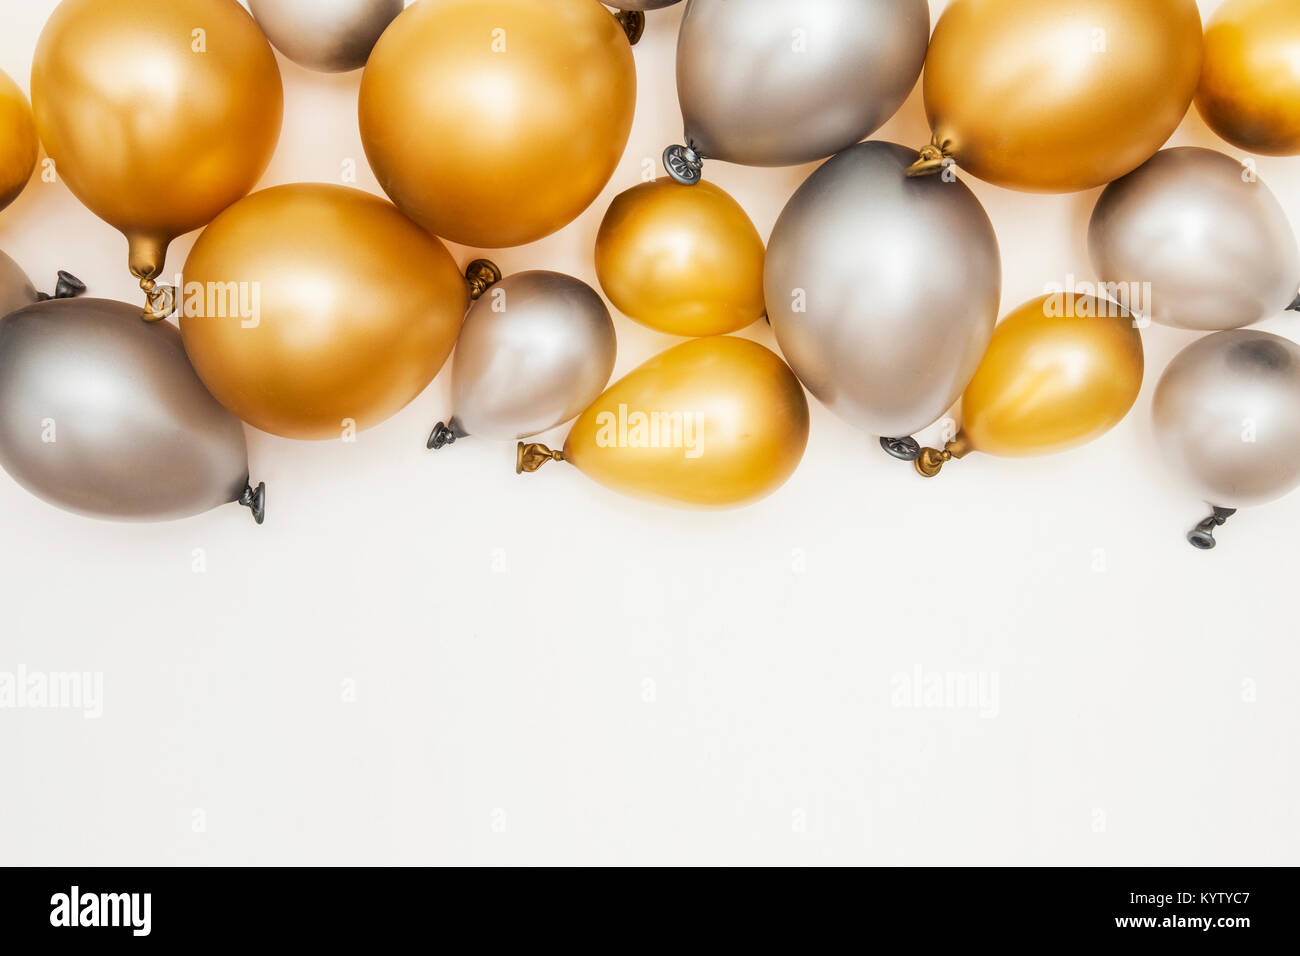 Gold and silver party celebration balloons on a plain background Stock Photo